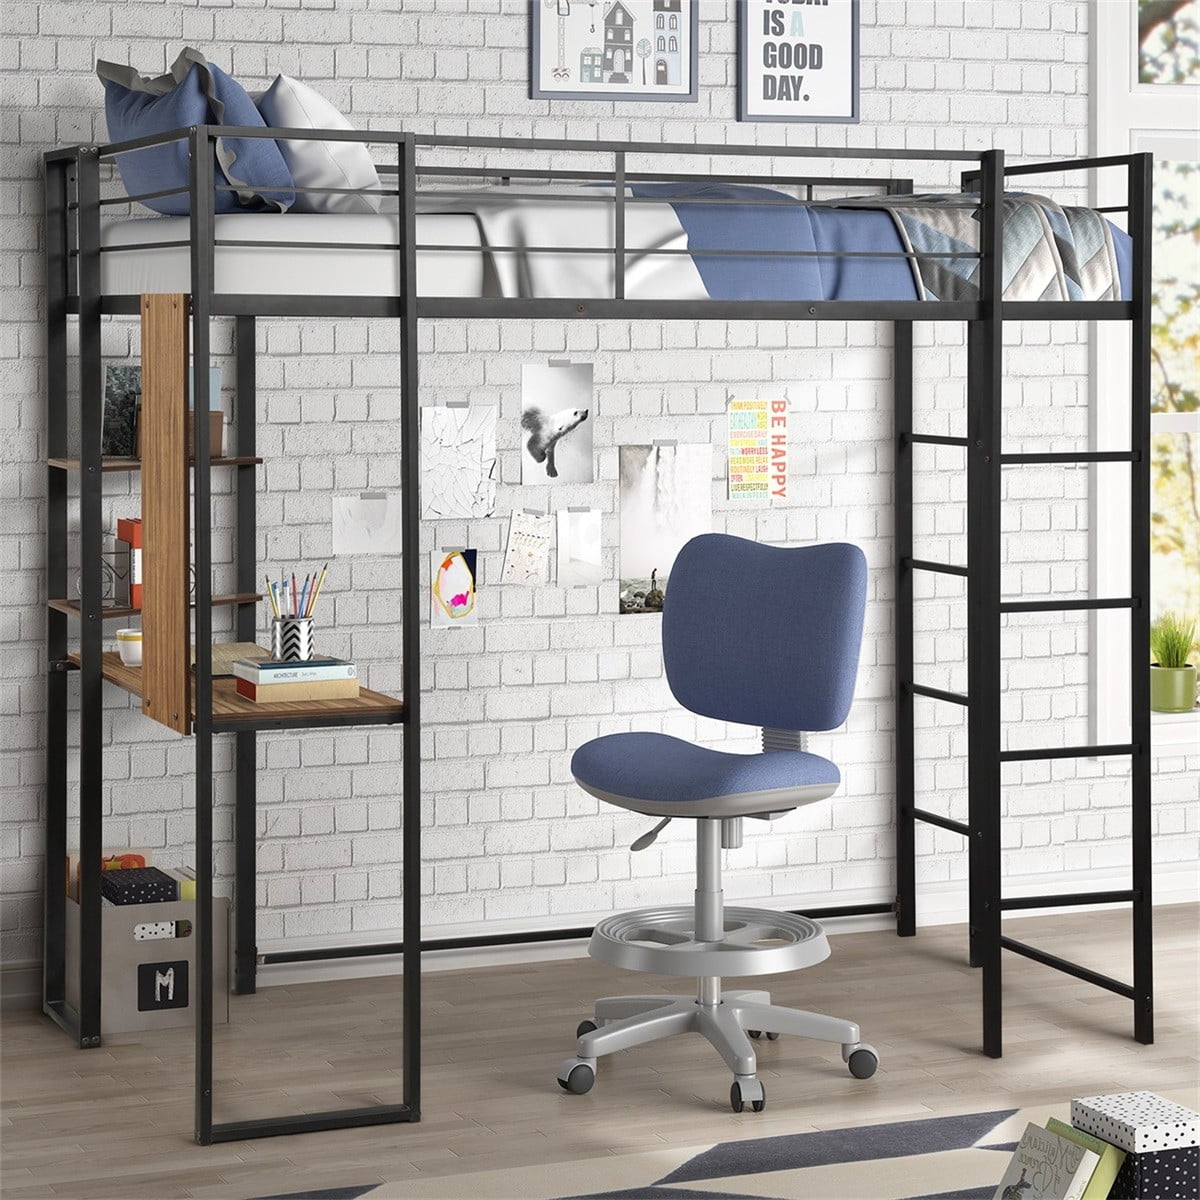 Modernluxe Metal Twin Size Loft Bed, How To Build A Twin Loft Bed With Desktop